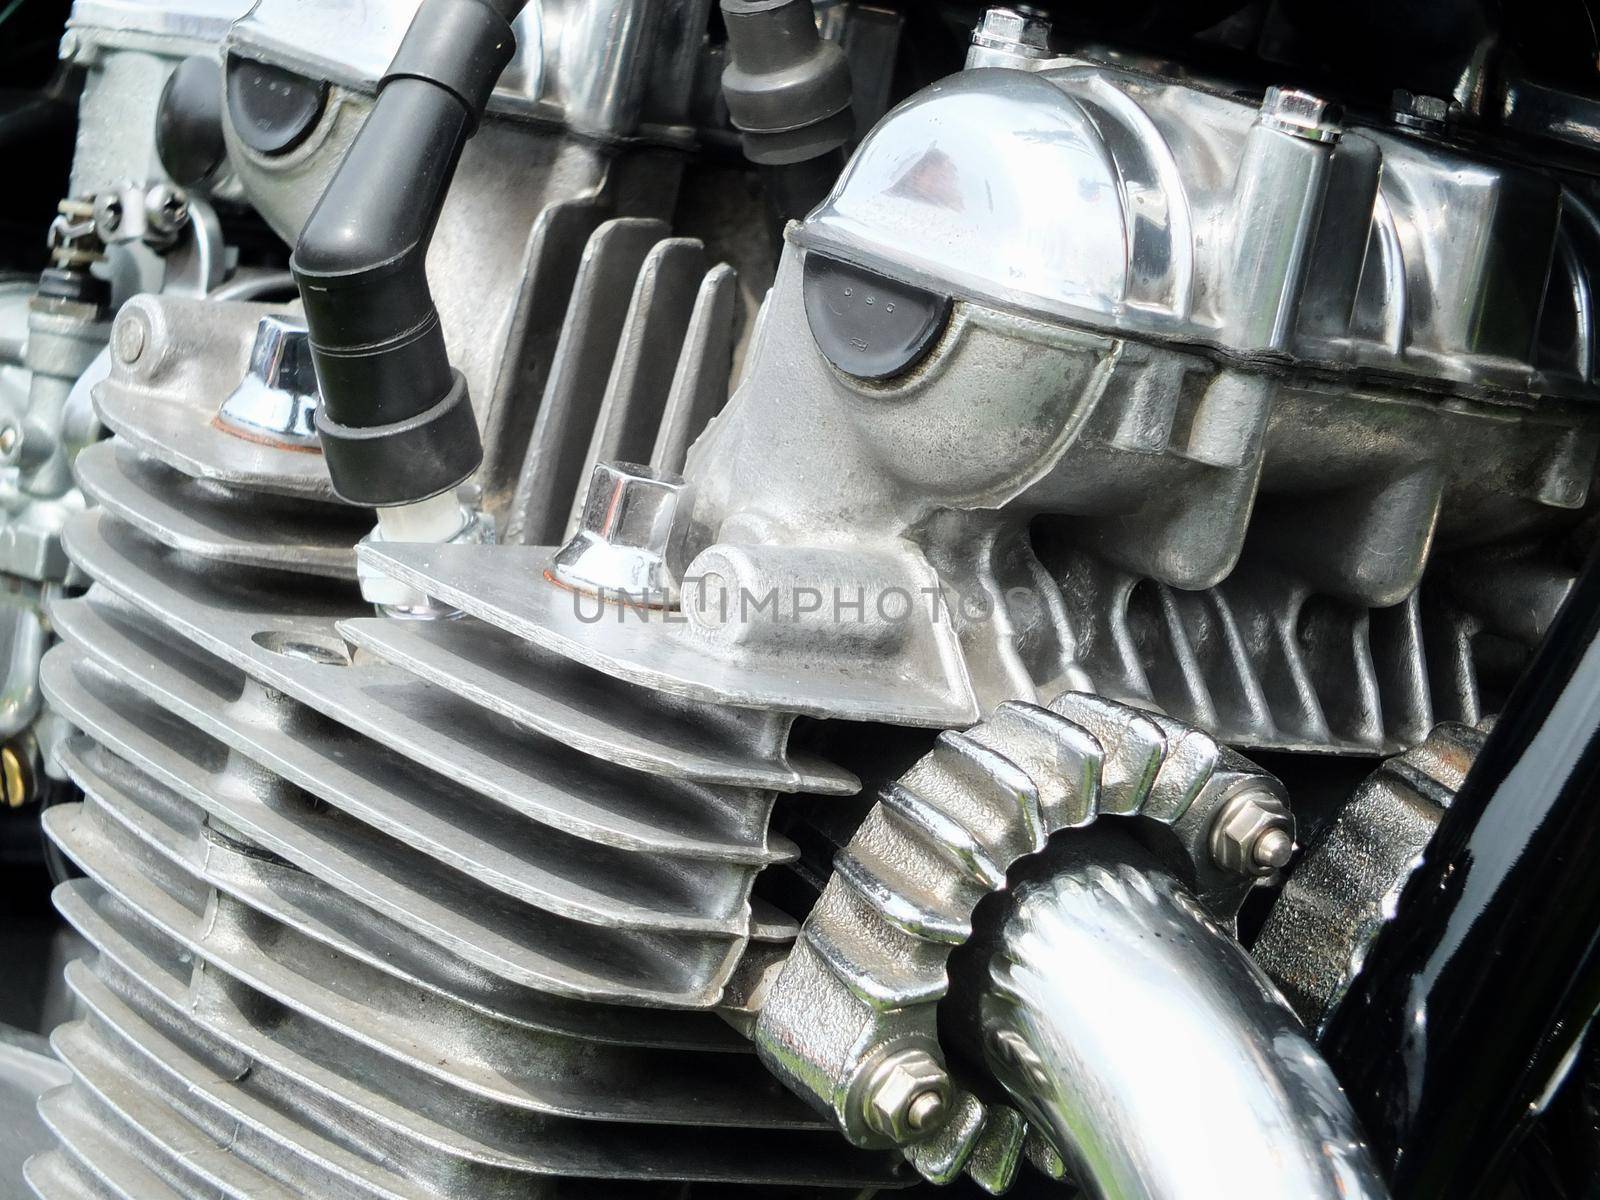 close up detail of the engine of an old vintage motorcycle with black frame and shiny chrome exhaust pipes by philopenshaw